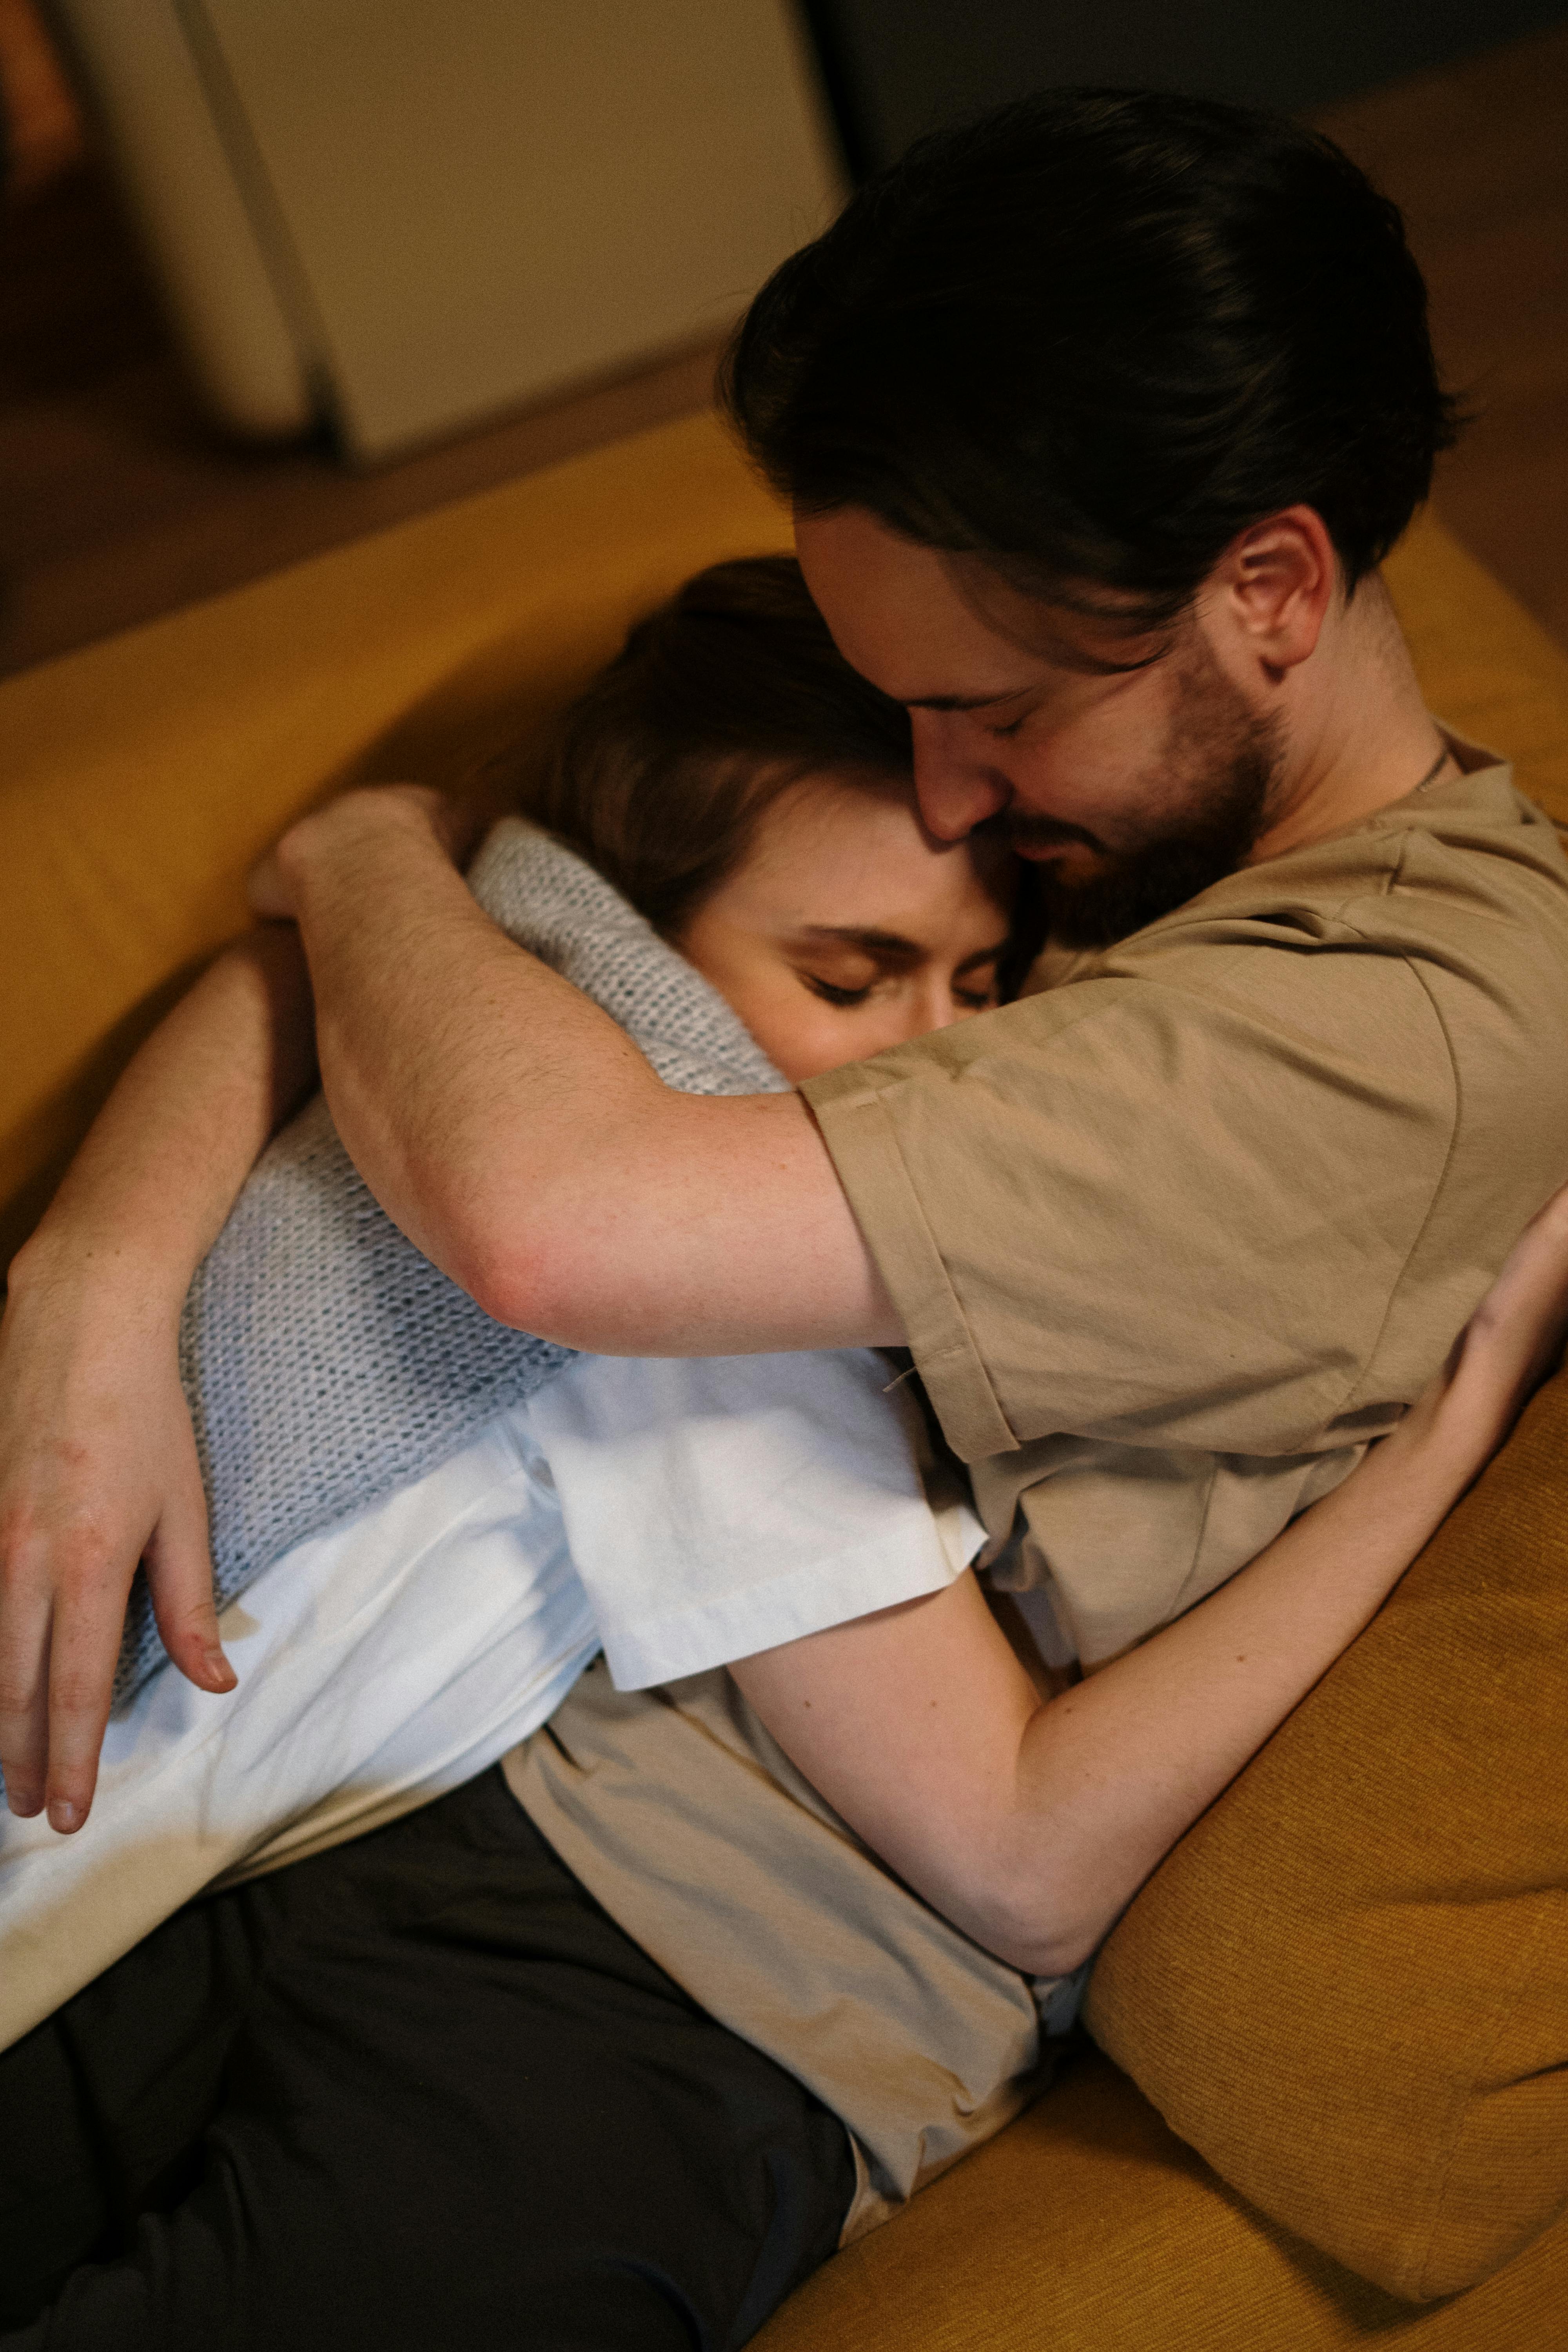 A couple embracing on a couch | Source: Pexels